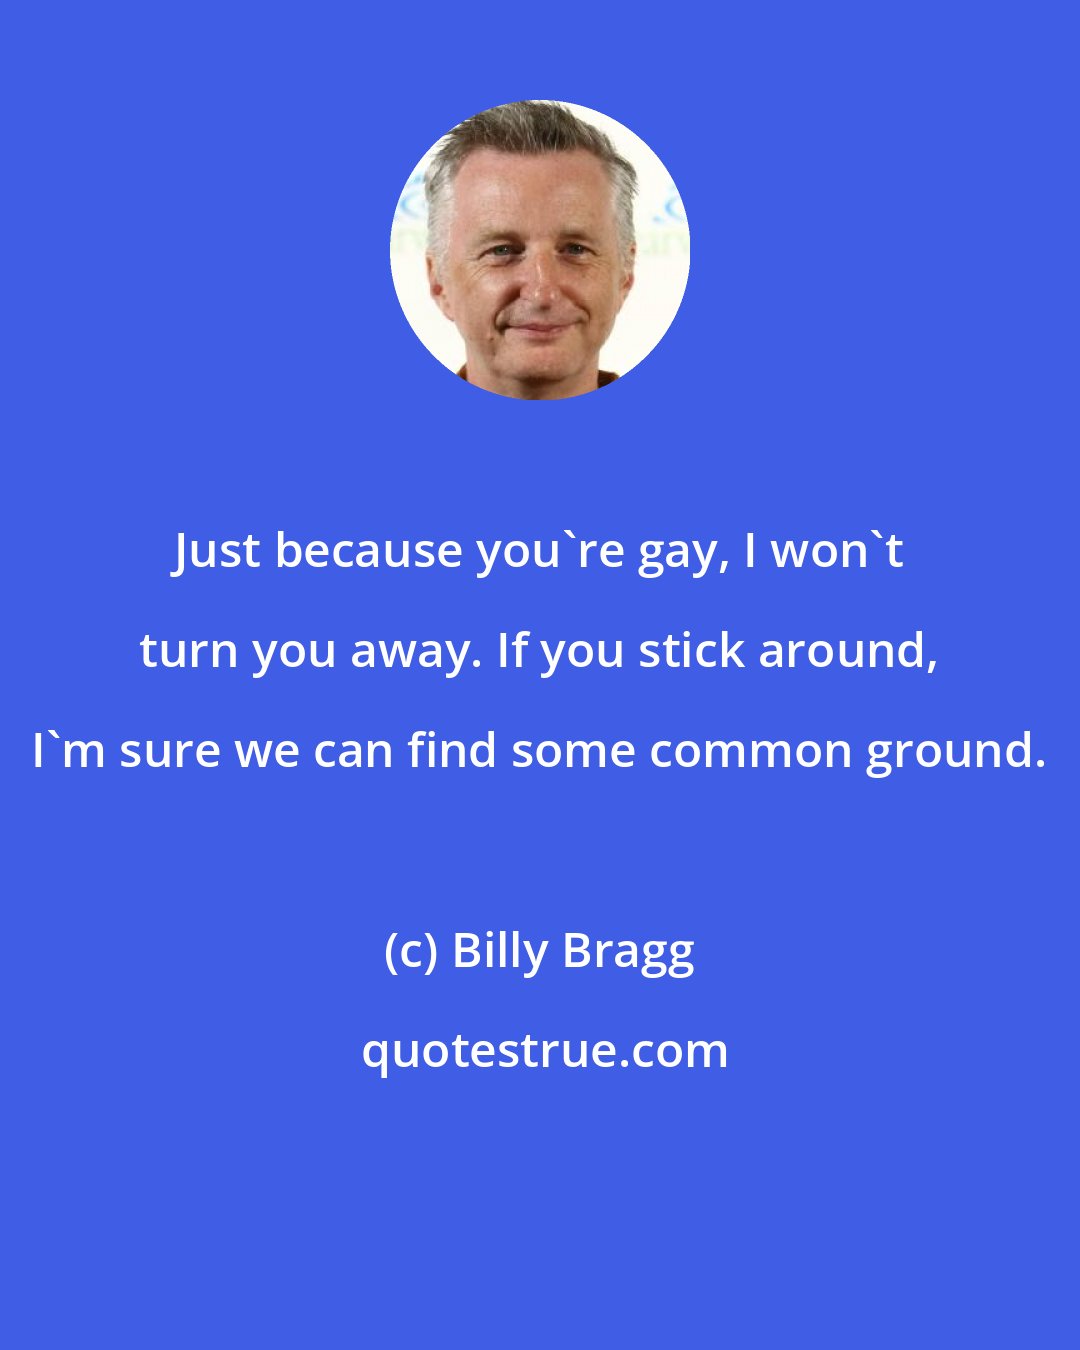 Billy Bragg: Just because you're gay, I won't turn you away. If you stick around, I'm sure we can find some common ground.